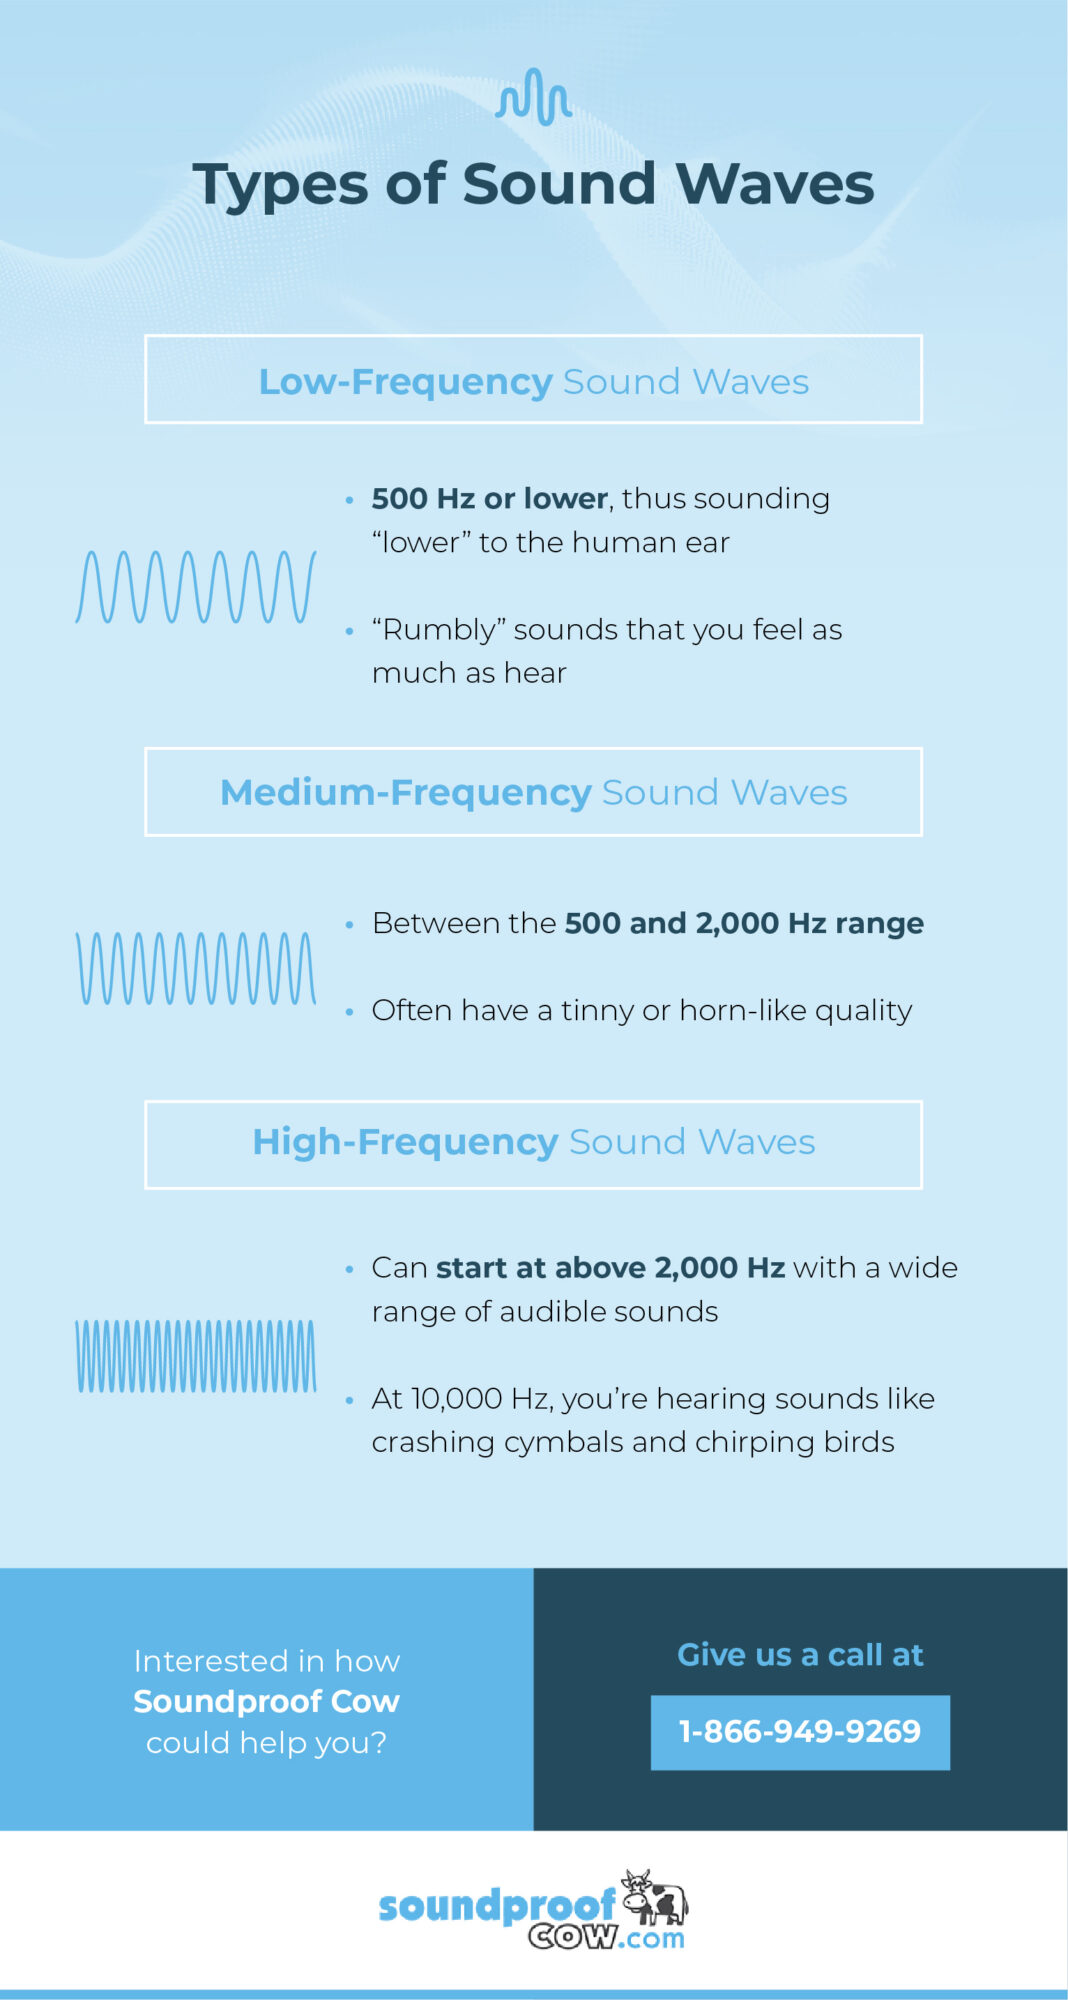 Types of Sound Waves